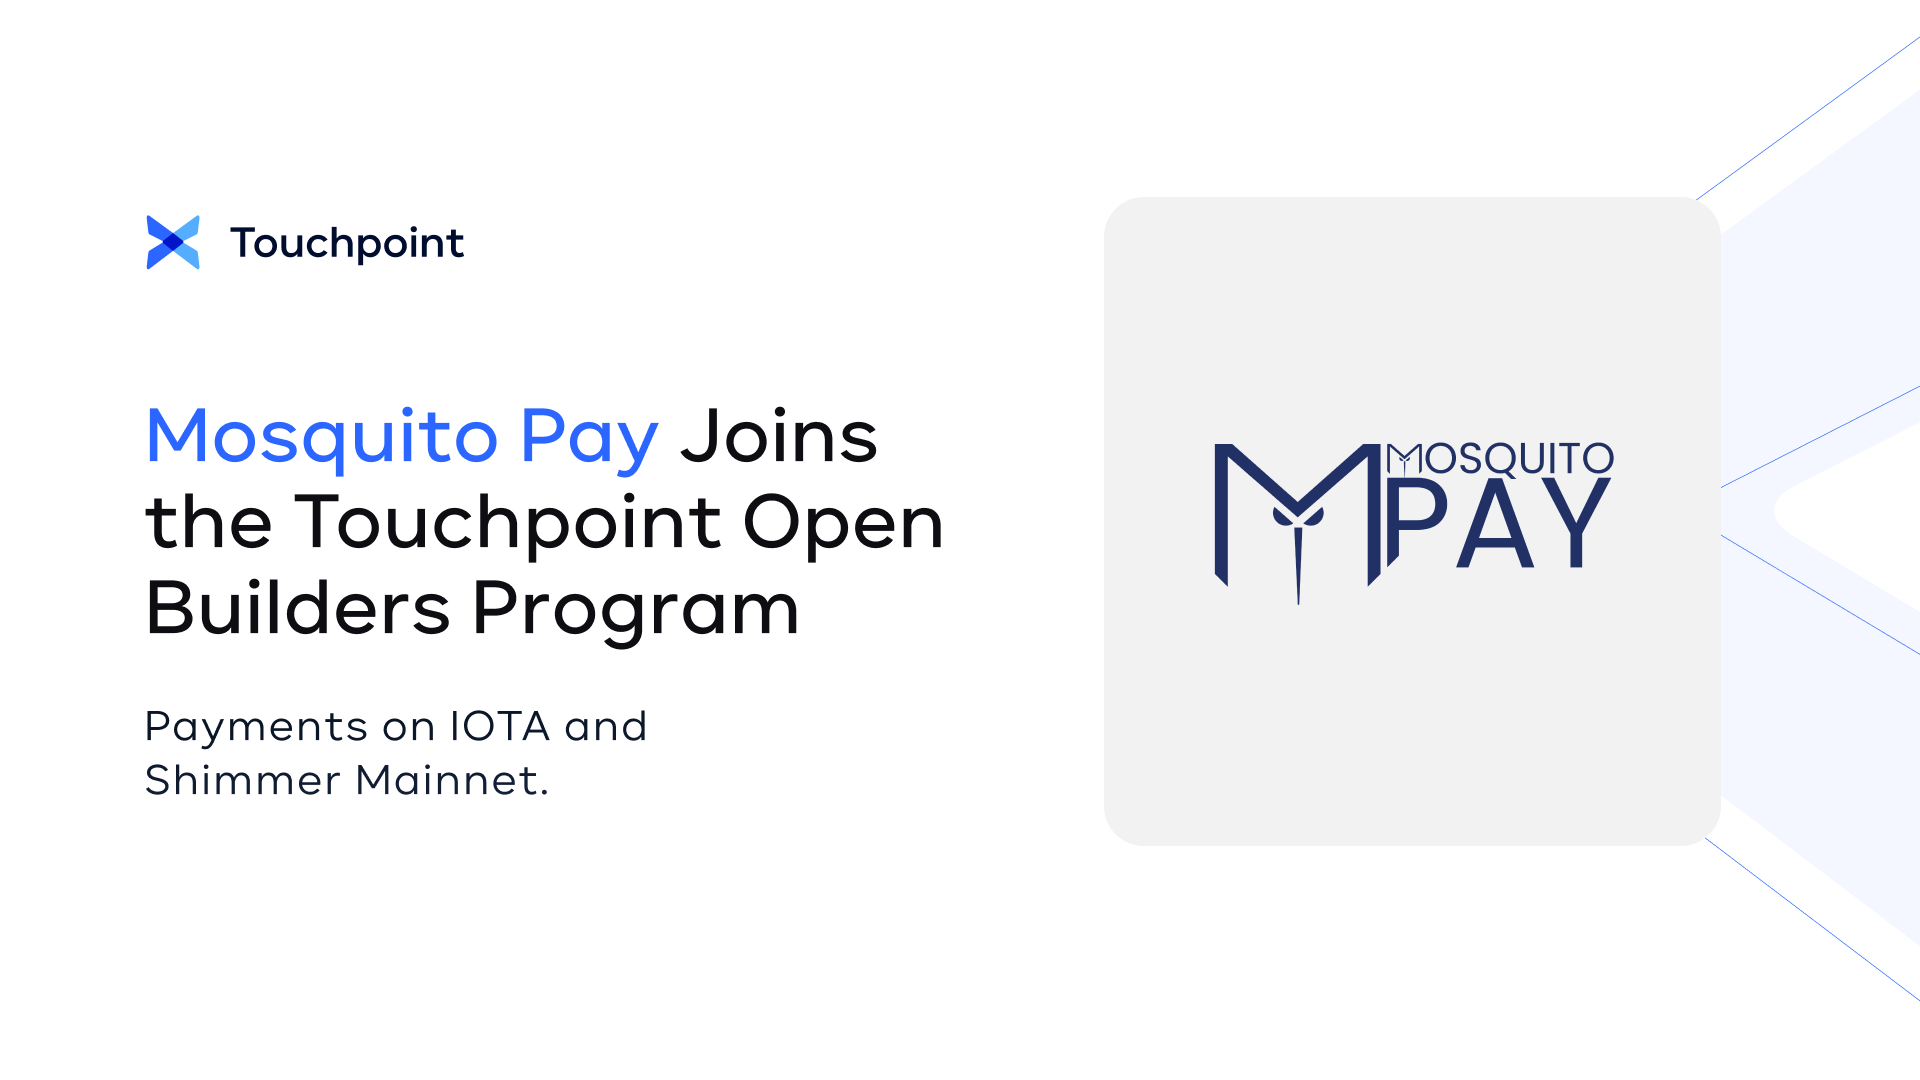 Mosquito Pay Joins Touchpoint Open Builders Program